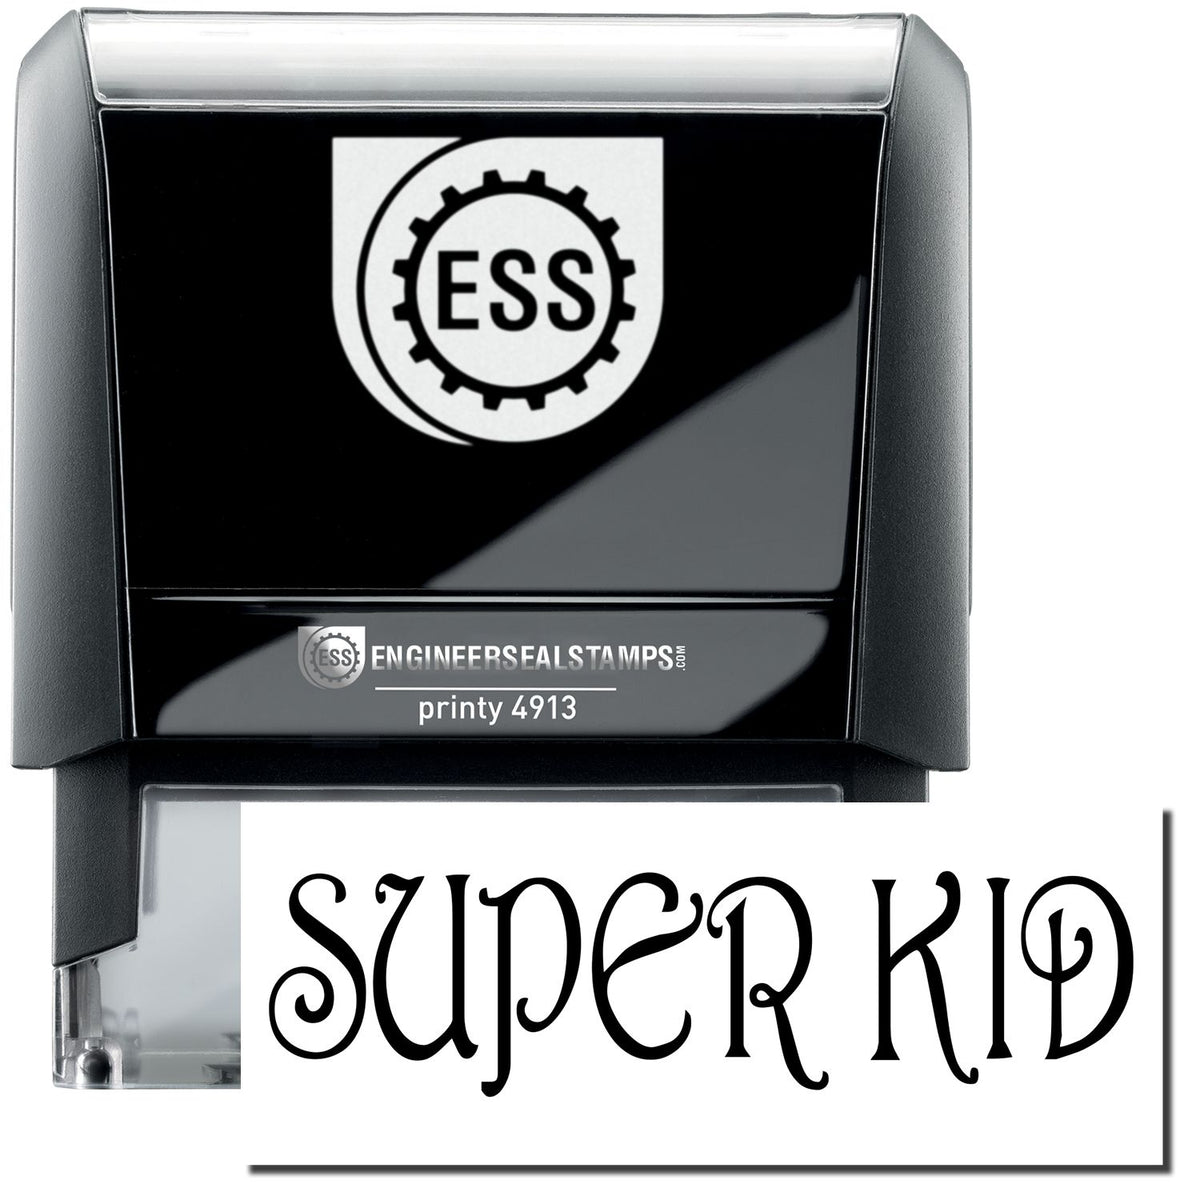 A self-inking stamp with a stamped image showing how the text &quot;SUPER KID&quot; in a large unique font is displayed by it.